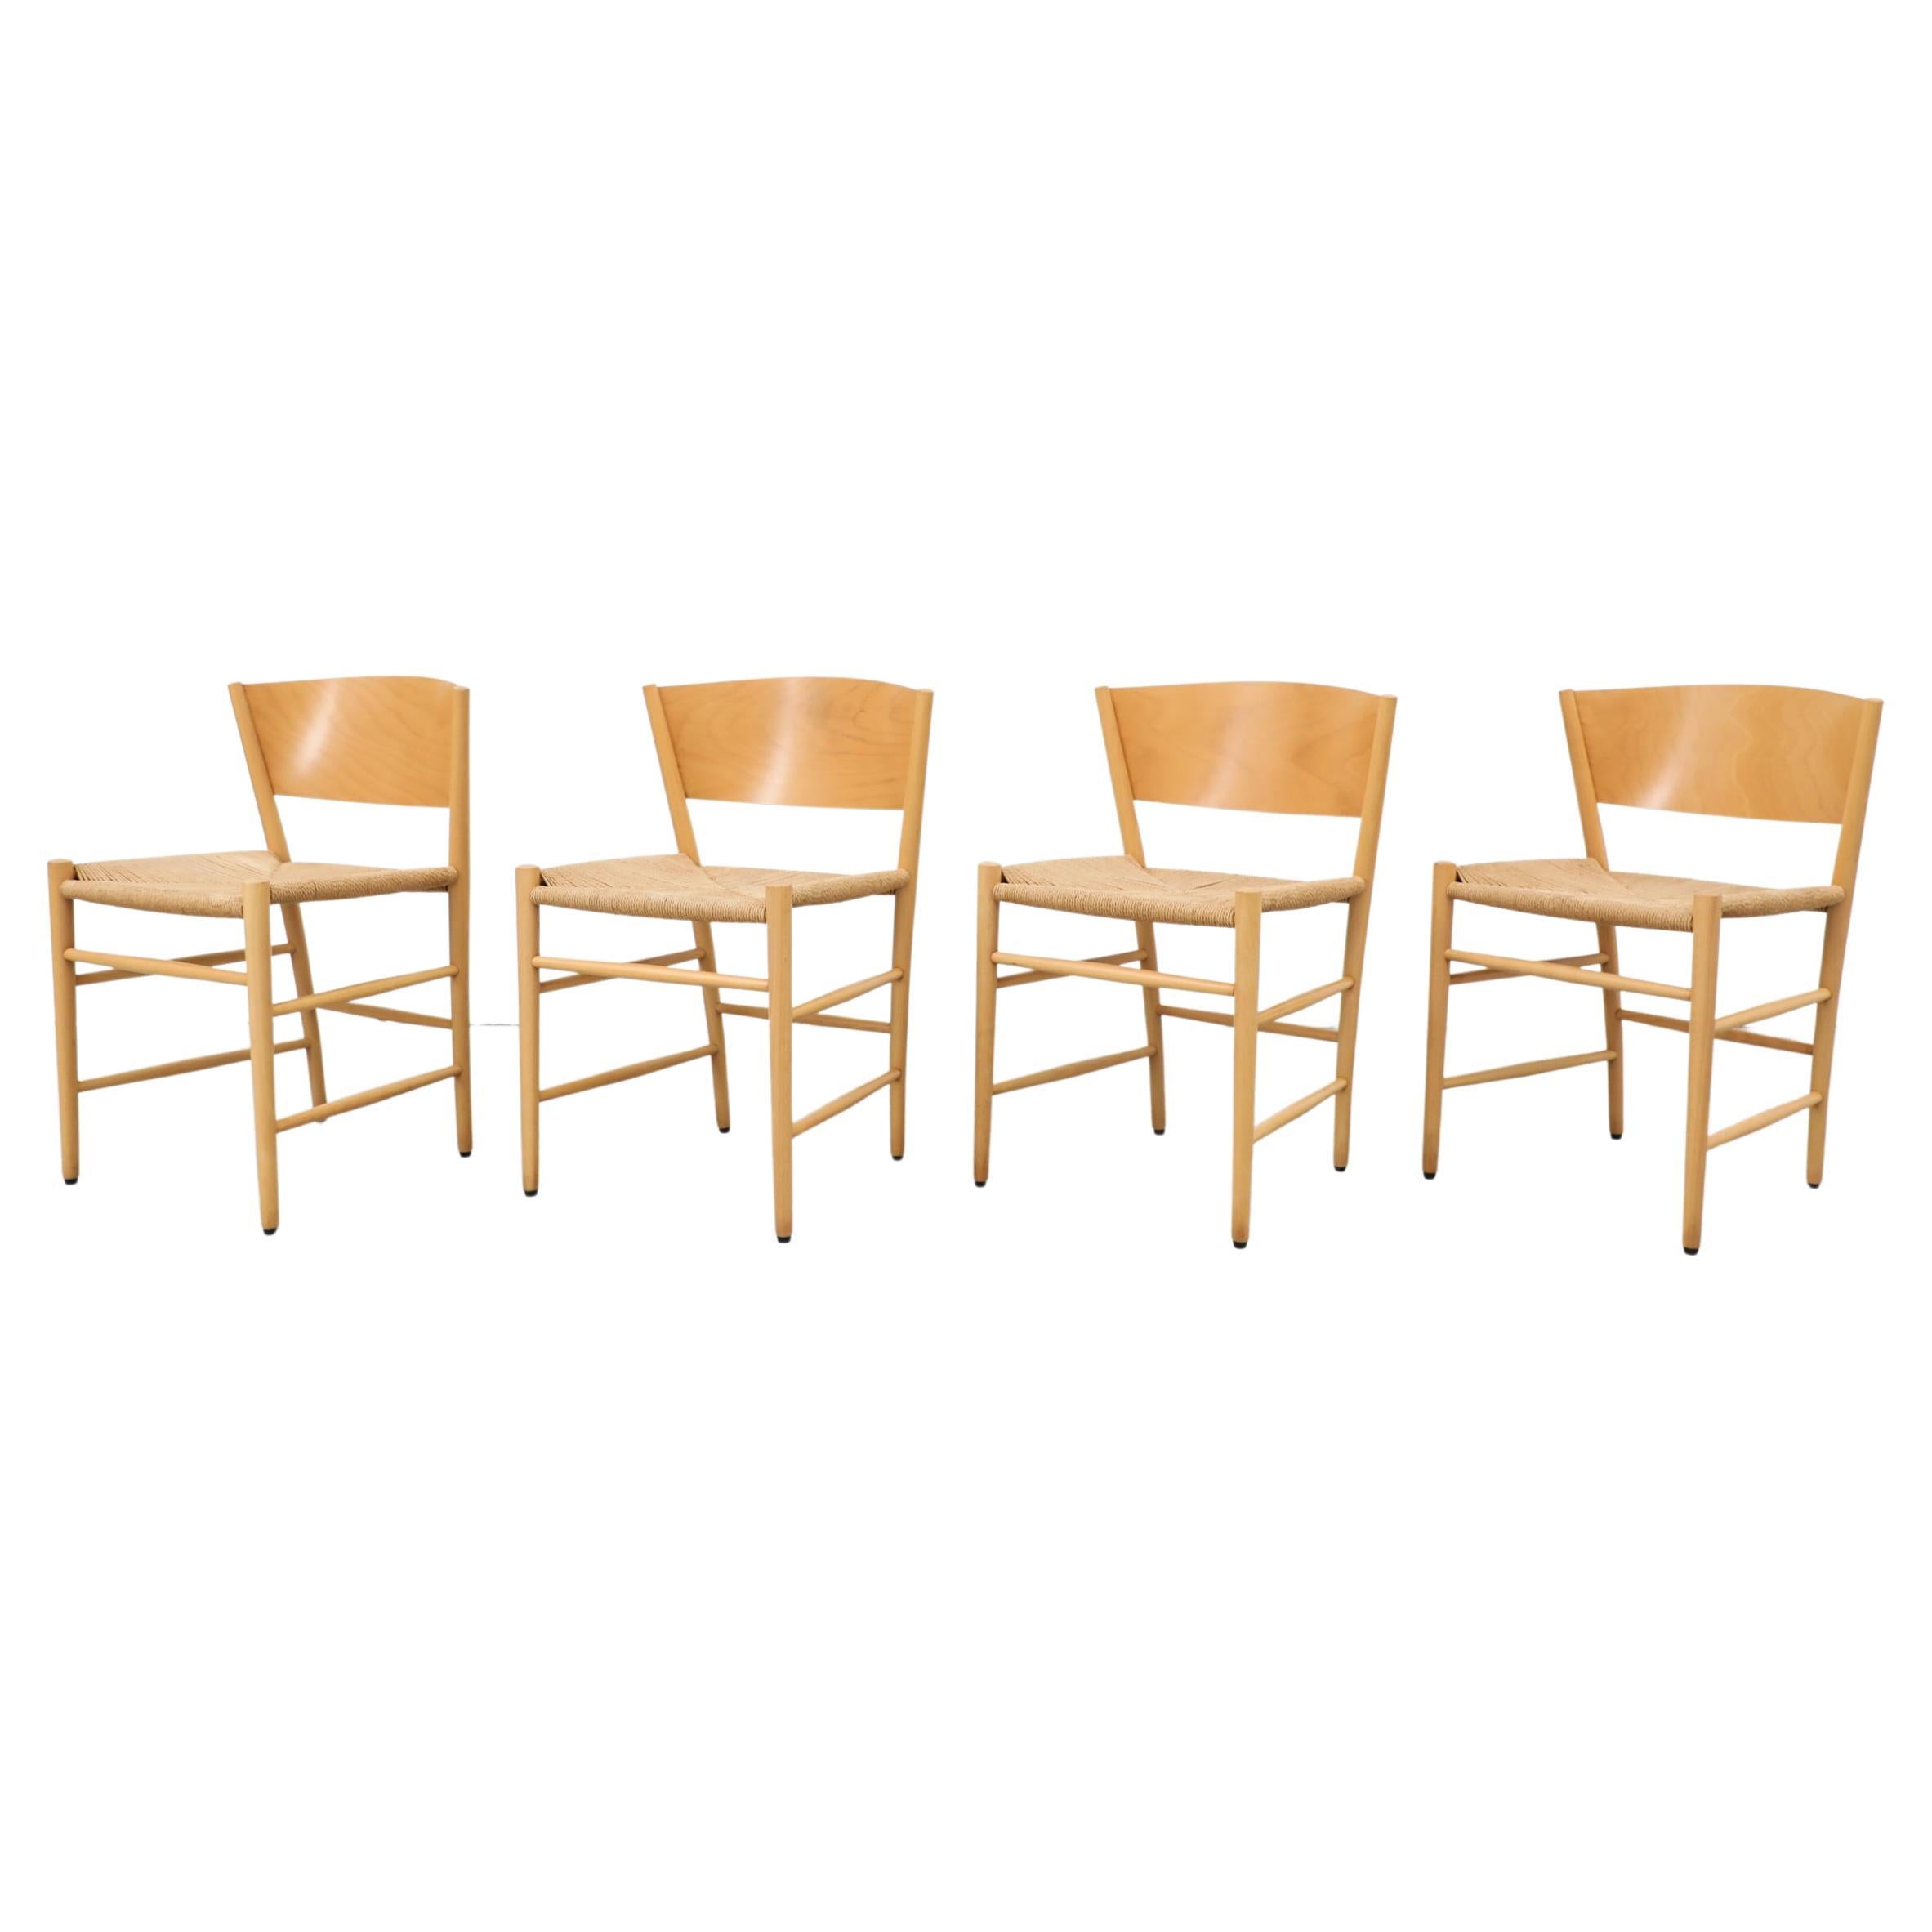 Set of 4 1990s Danish 'Jive' Chairs by Tom Stepp in Birch for Kvist Møbler For Sale